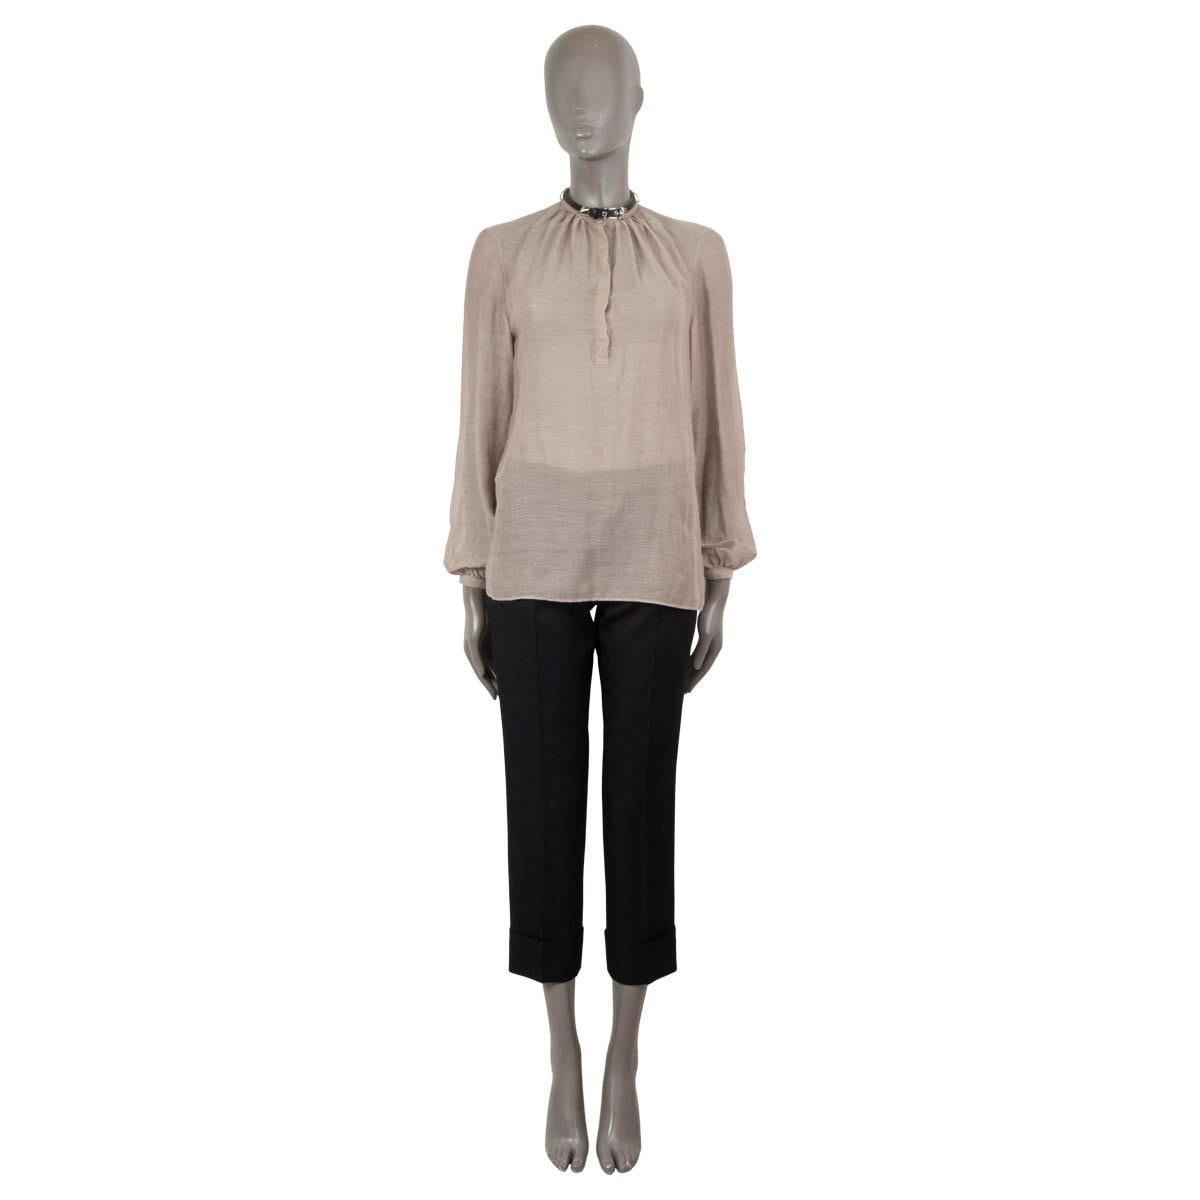 100% authentic Gabriela Hearst Vlychos blouse in taupe cotton (68%) and silk (32%) is characterised by a detachable silver-tipped black leather strap choker which is inspired by Uruguayan gaucho culture. It's crafted from sheer fluid cotton blended